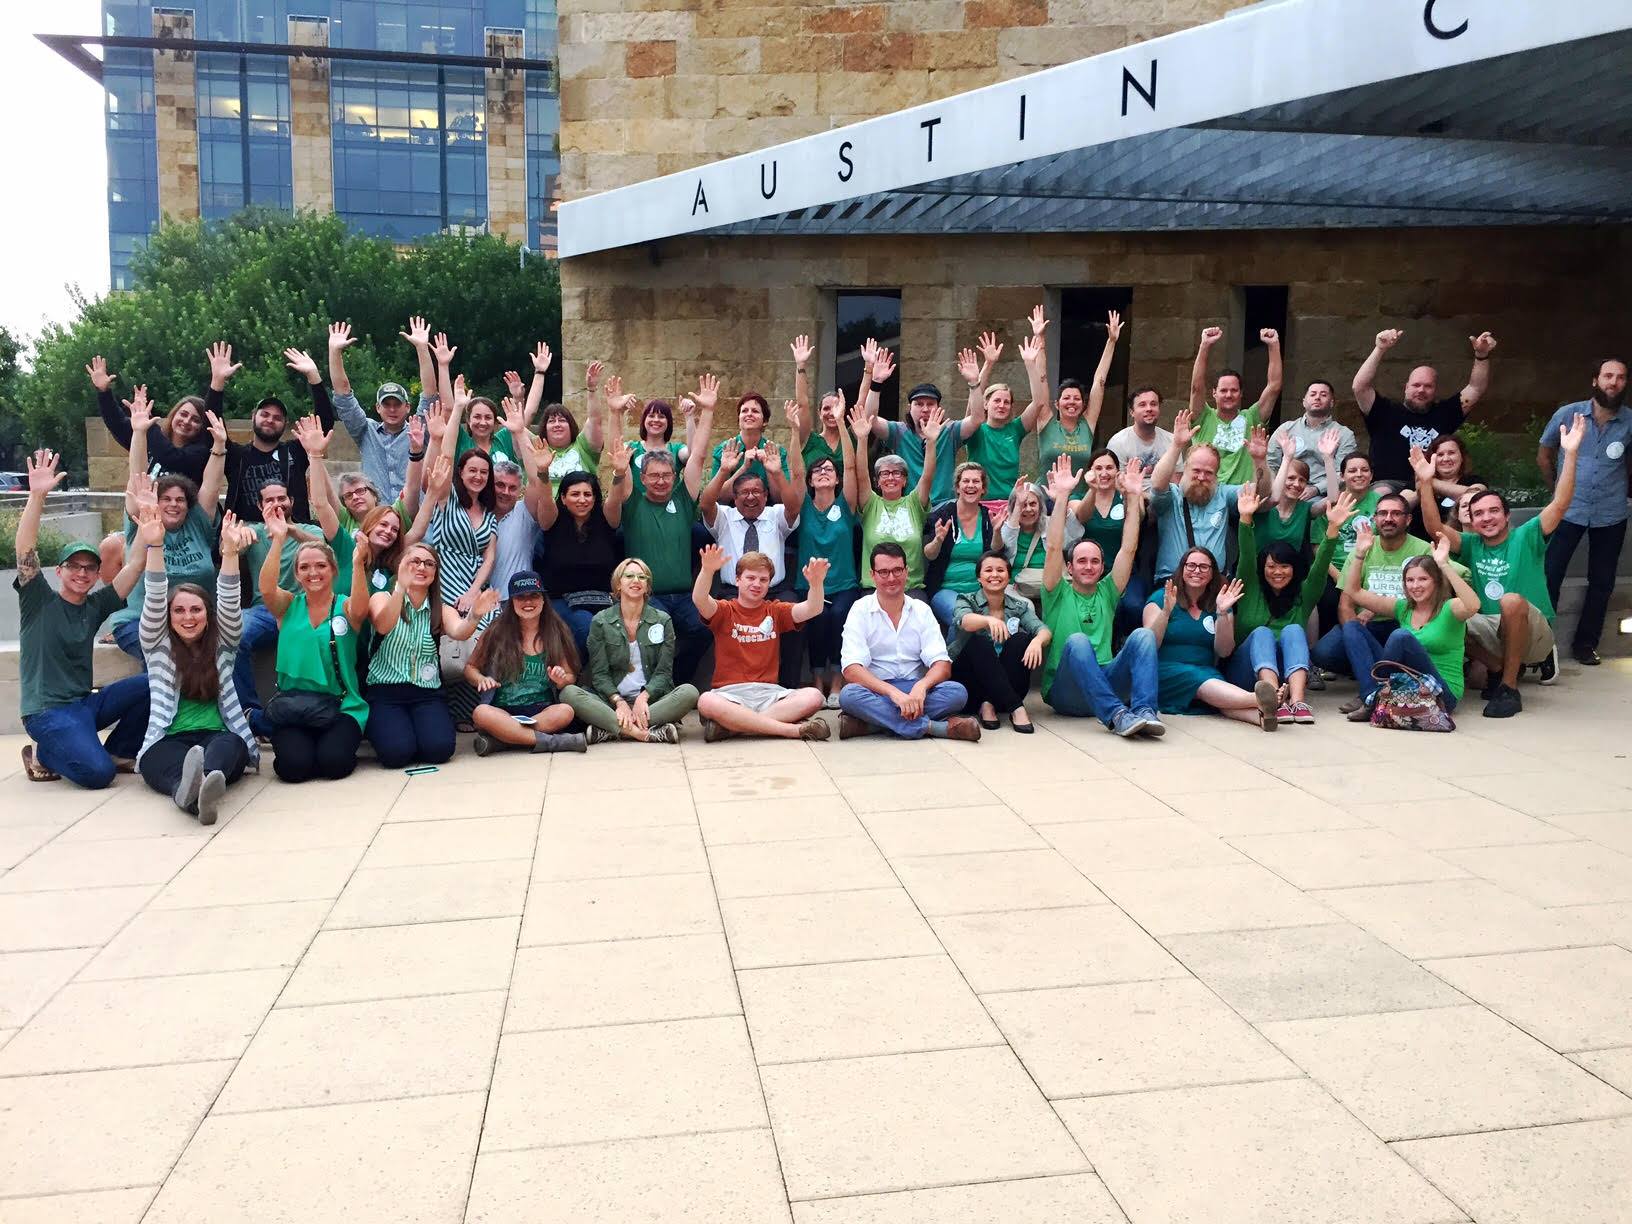 Springdale Farm supporters at Austin City Hall